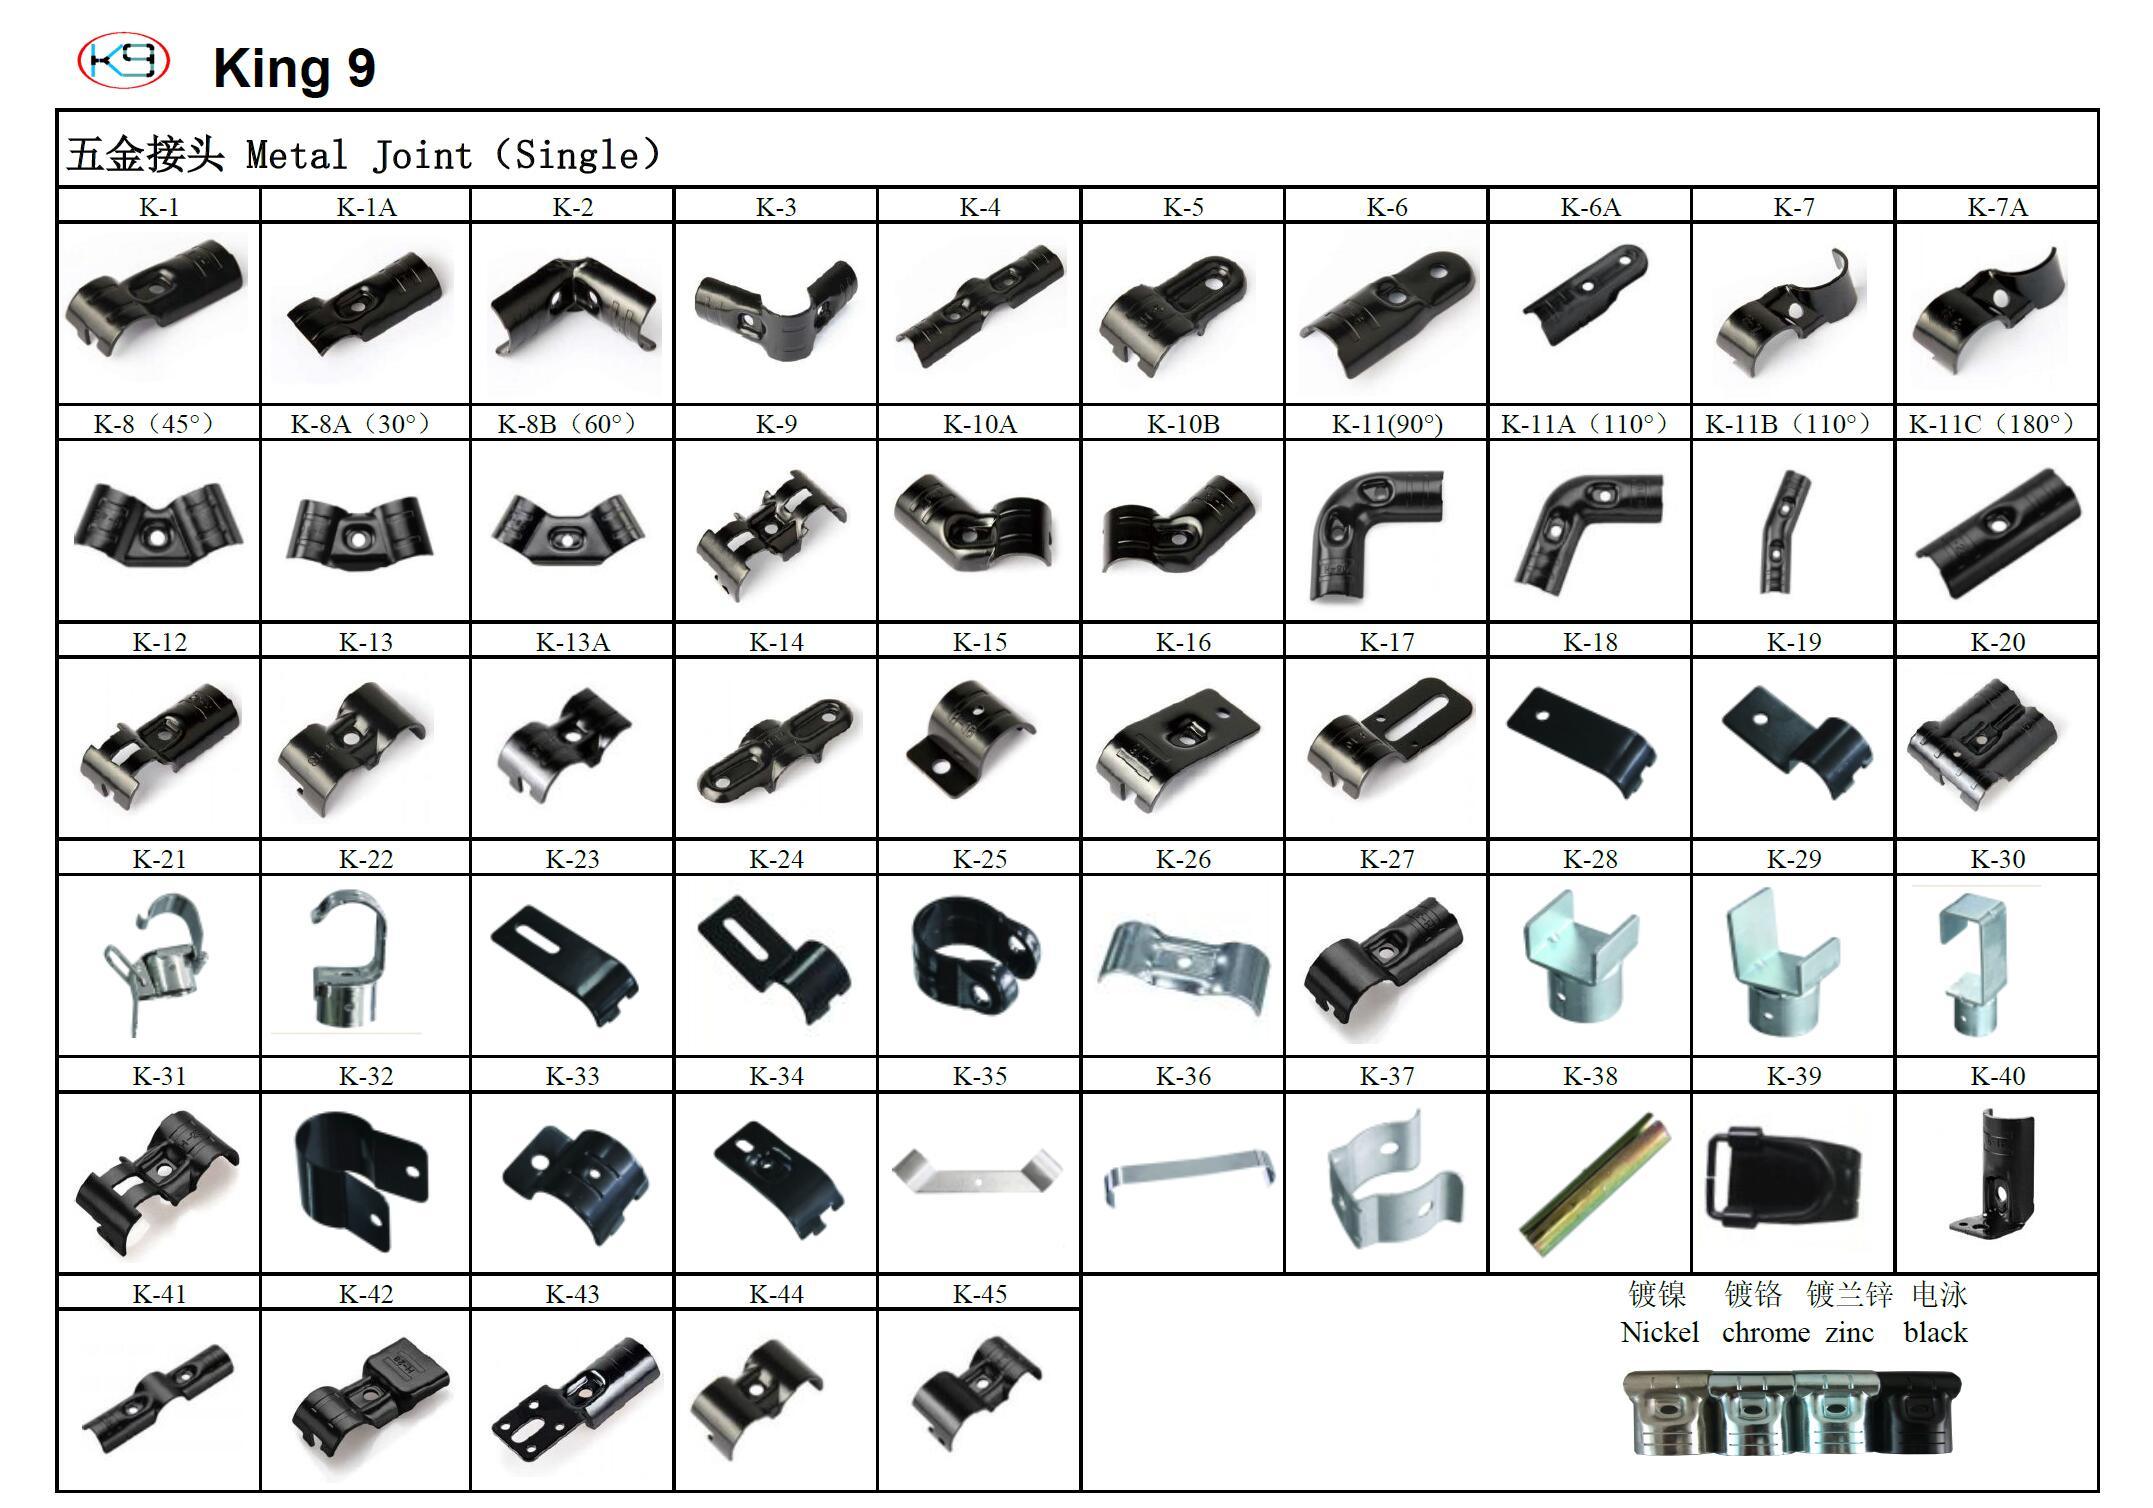 High-quality Metal Joints K-1(H-1)